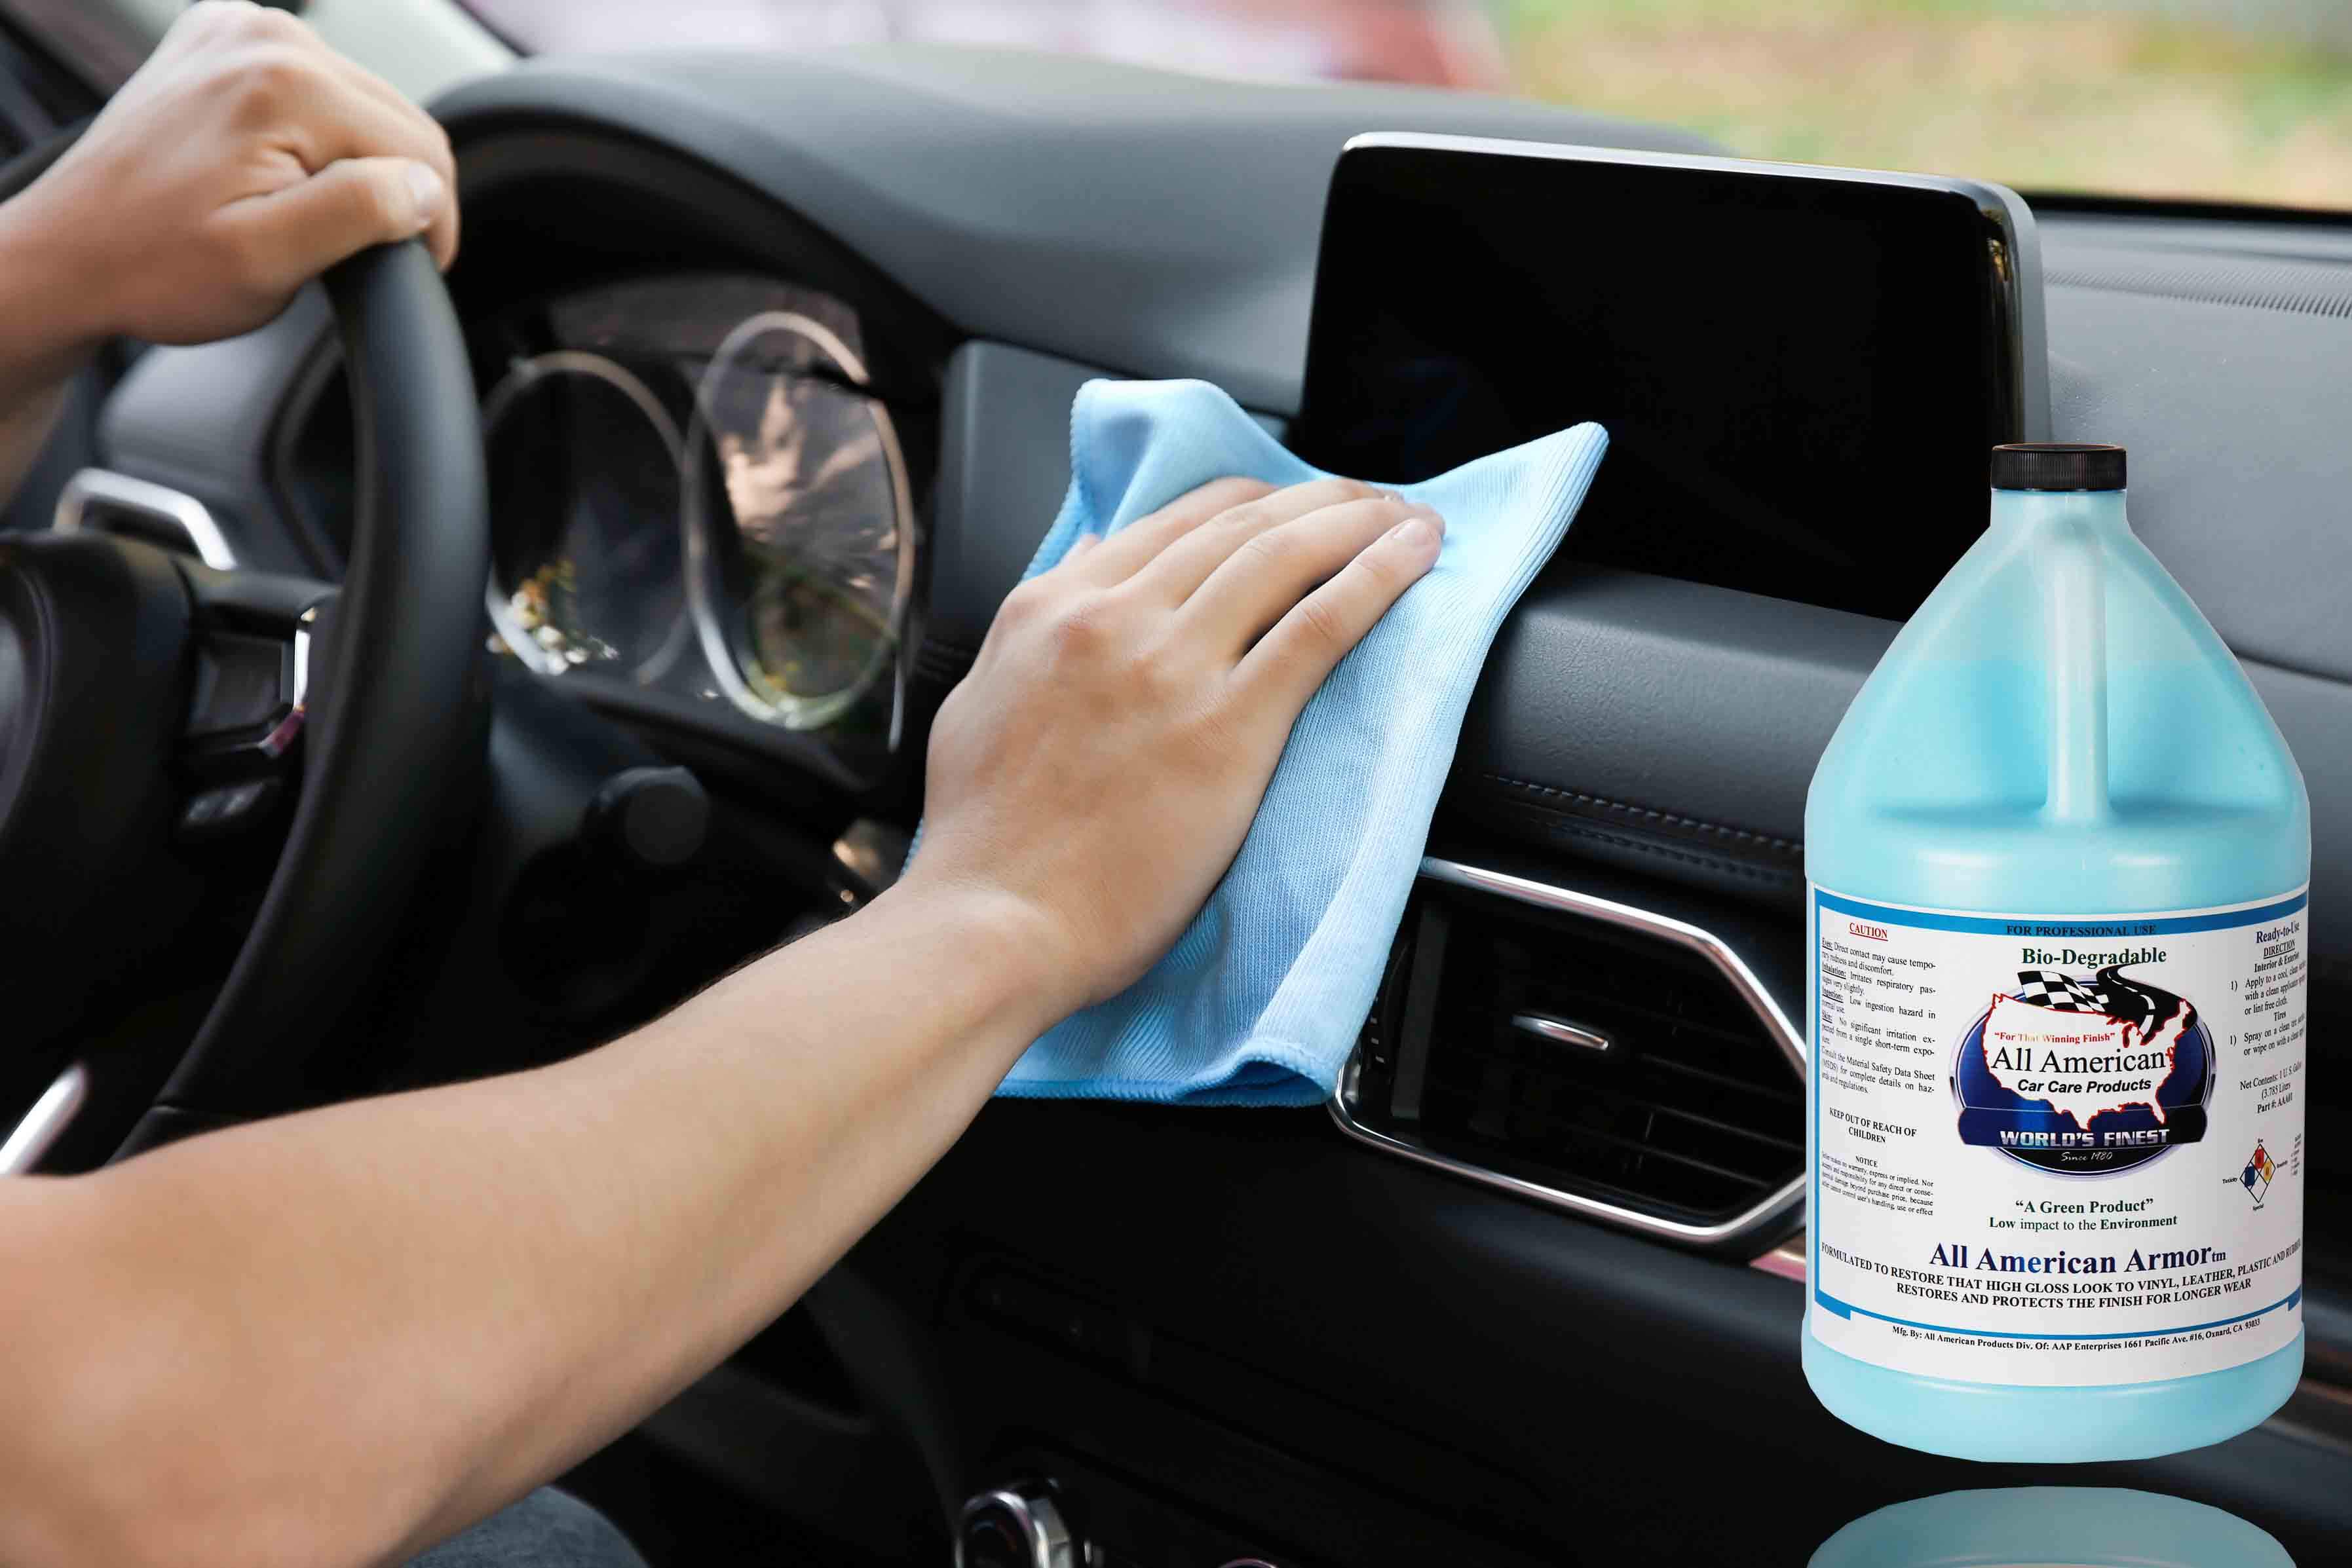 Superior Products - Professional Detailing Supplies & Car Wash Chemicals